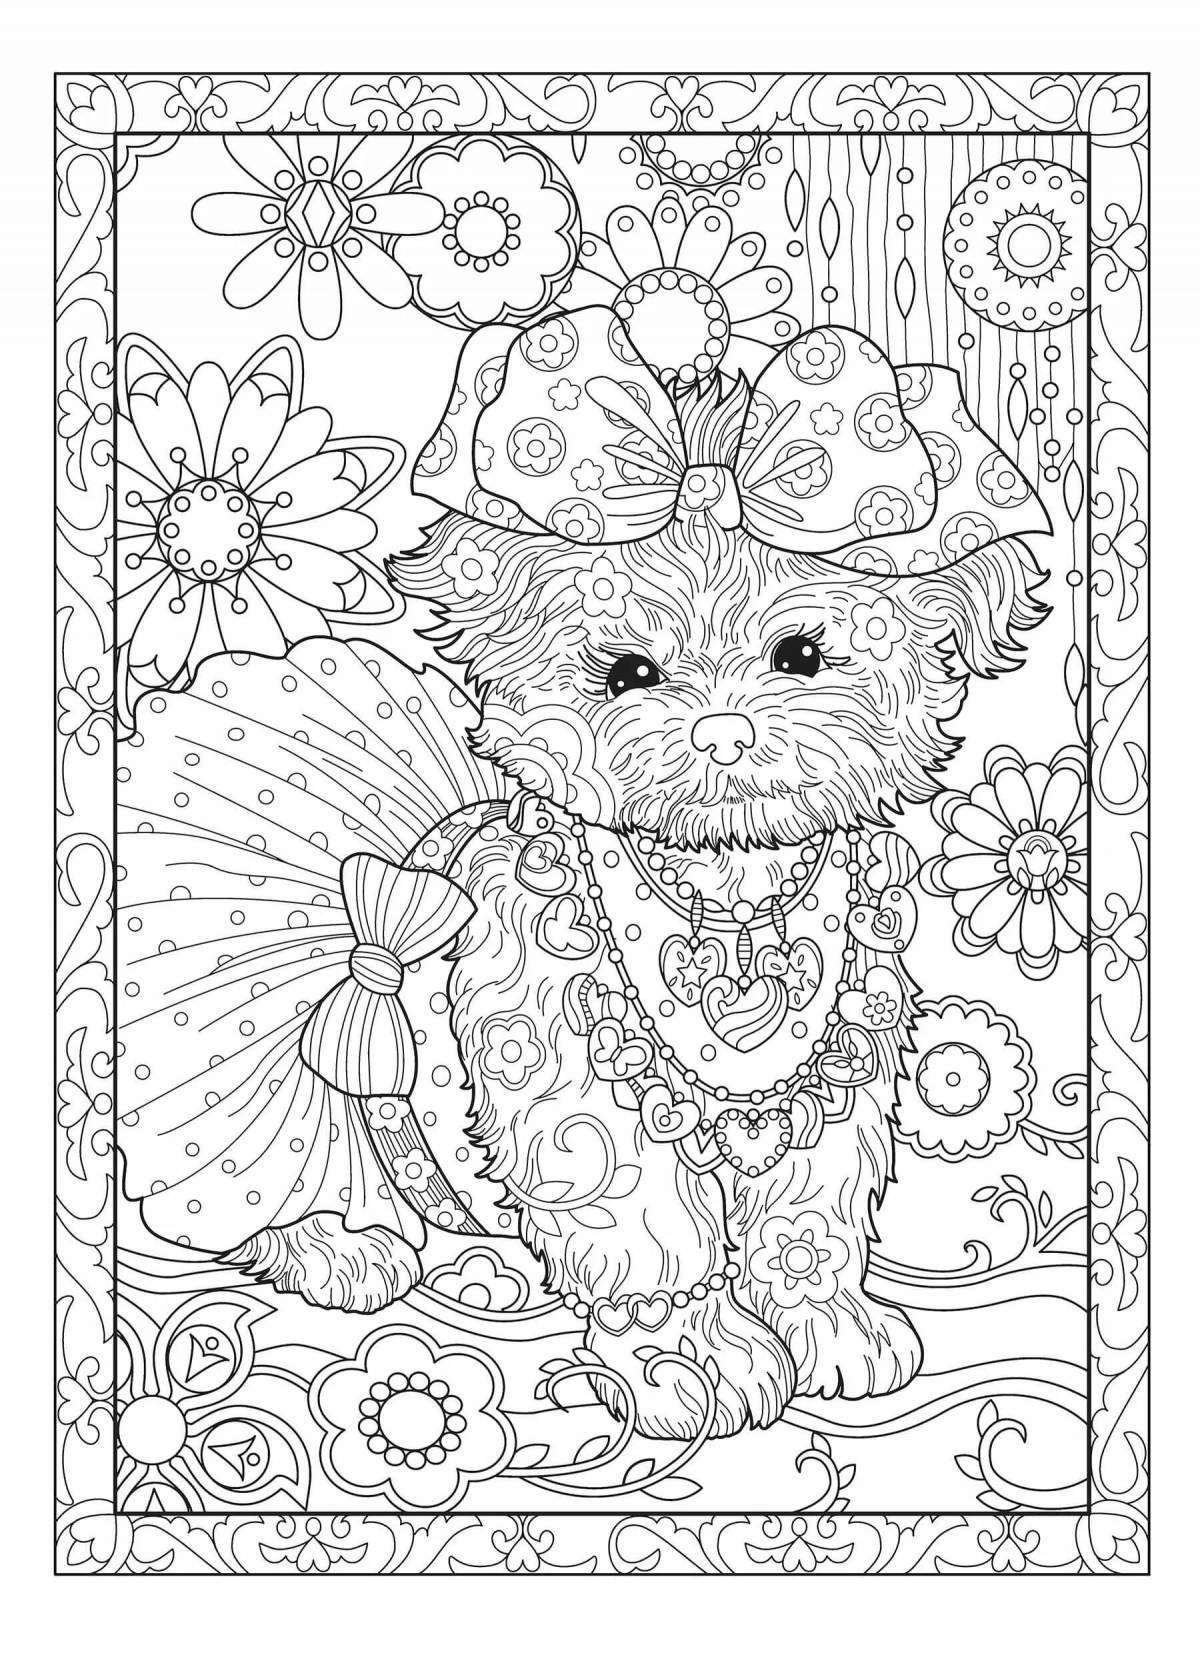 Fun animal coloring pages for adults